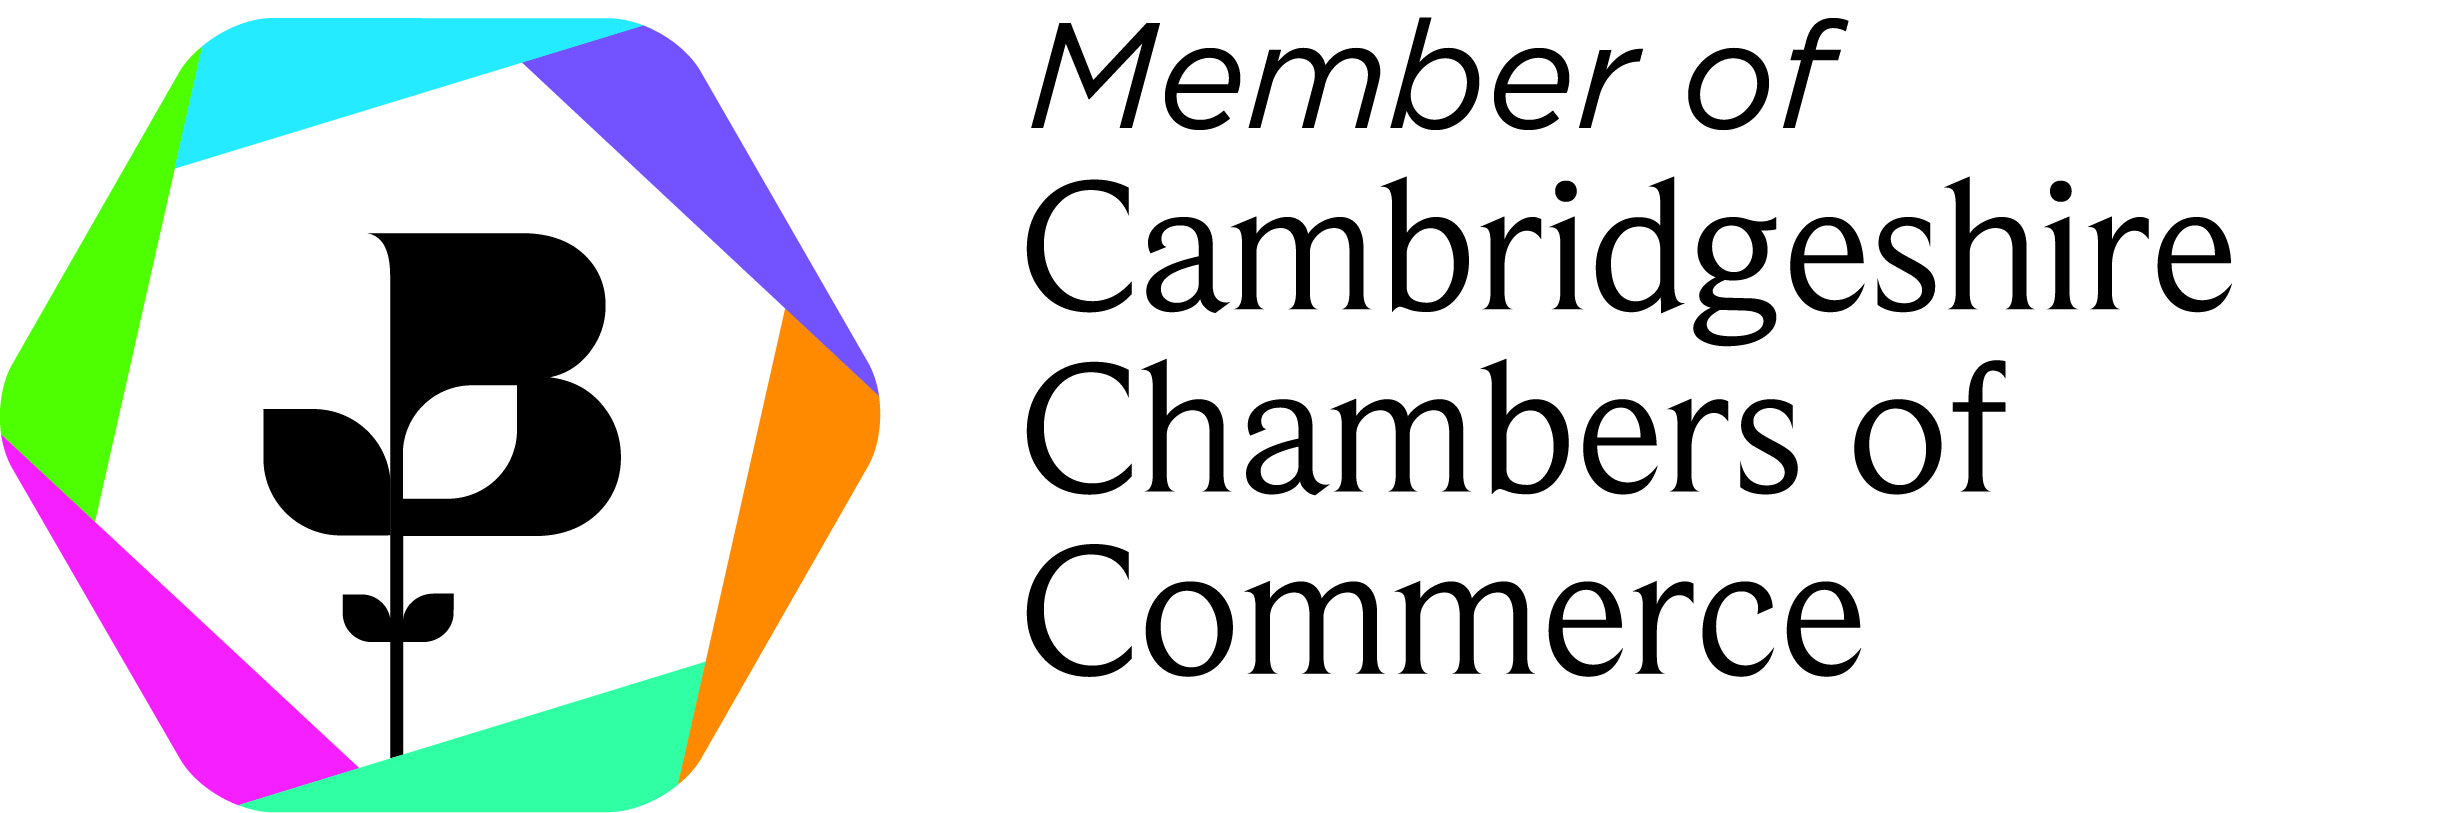 We Have Joined The Cambridgeshire Chambers of Commerce